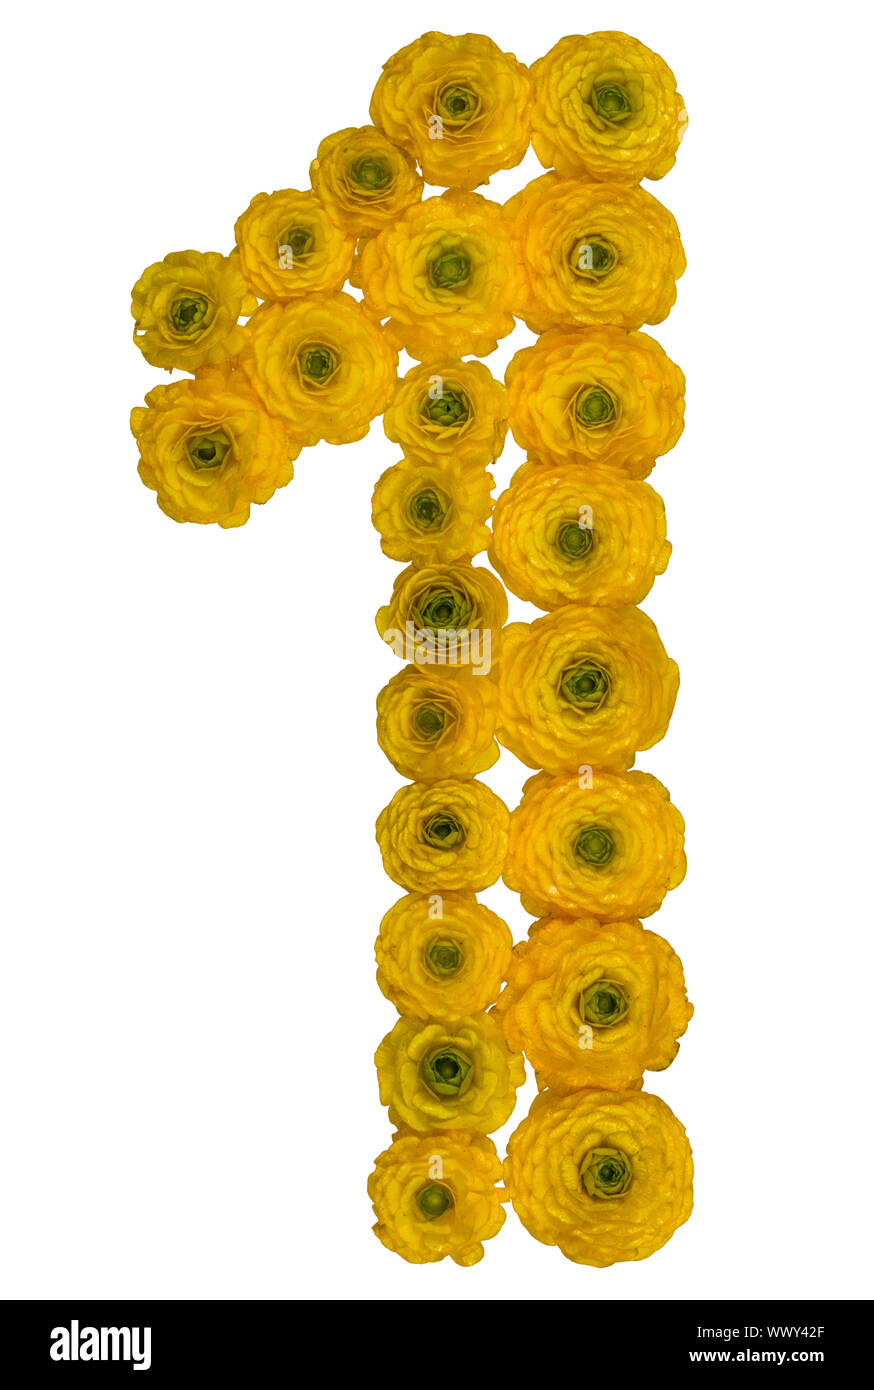 Arabic numeral 1, one, from yellow flowers of buttercup, isolated on white background Stock Photo